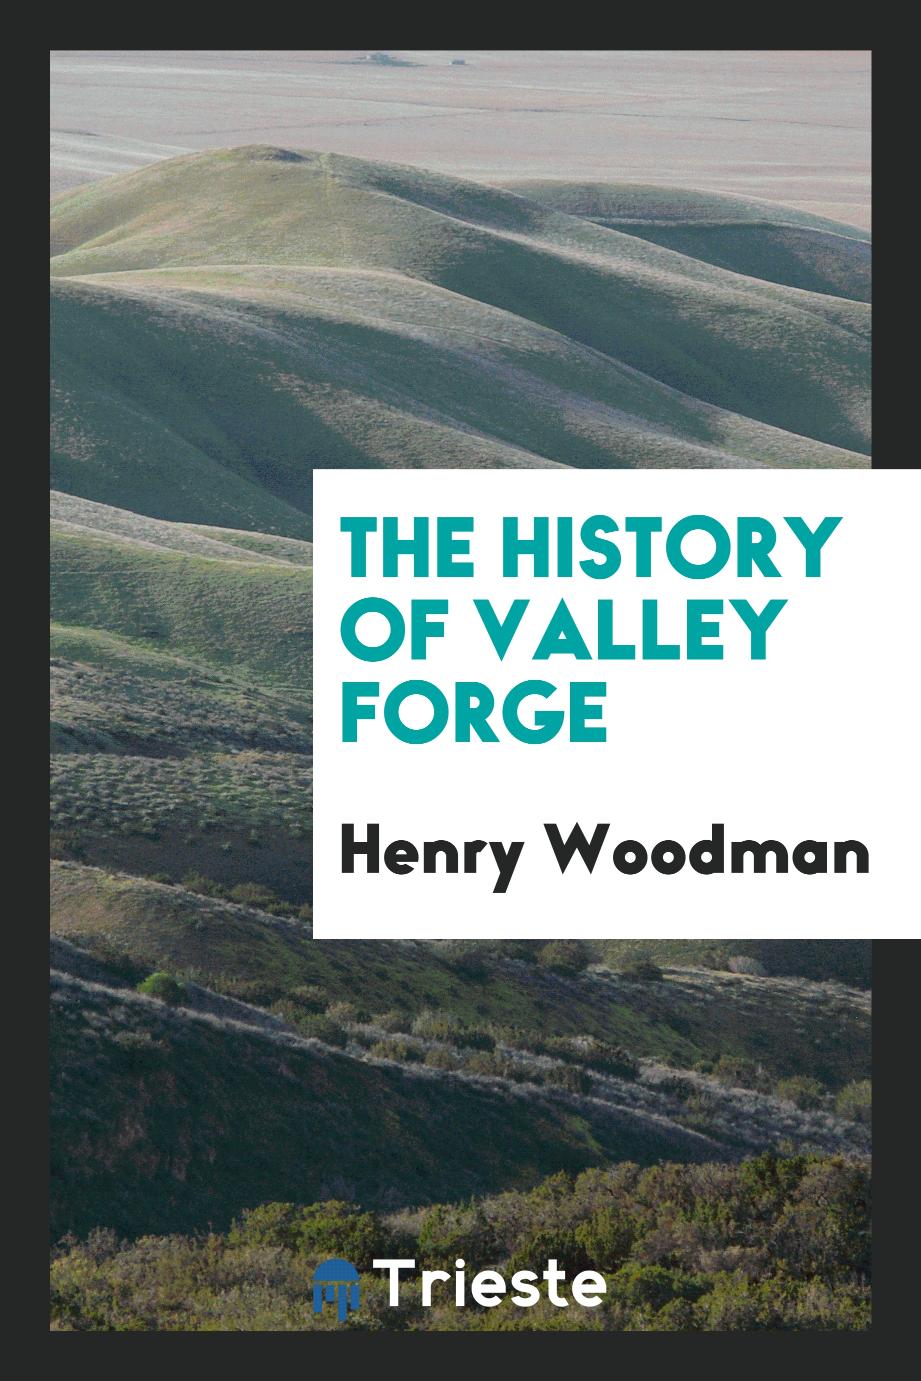 Henry Woodman - The history of Valley Forge